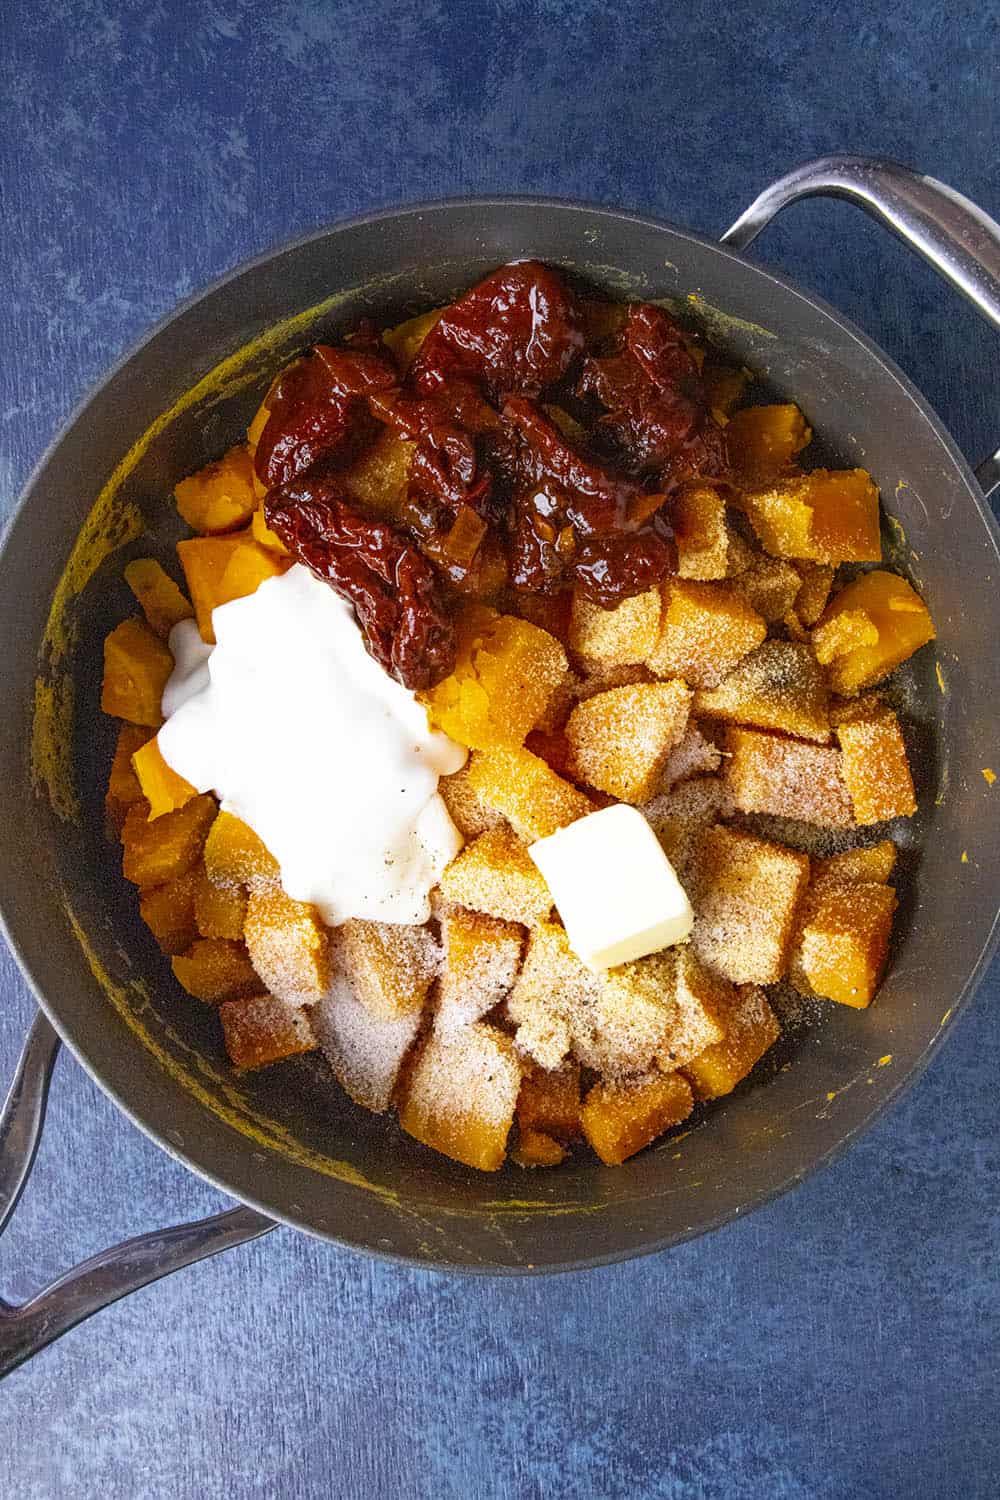 Boiled sweet potatoes in a pot with chipotles, crema, butter and seasonings, ready to mash